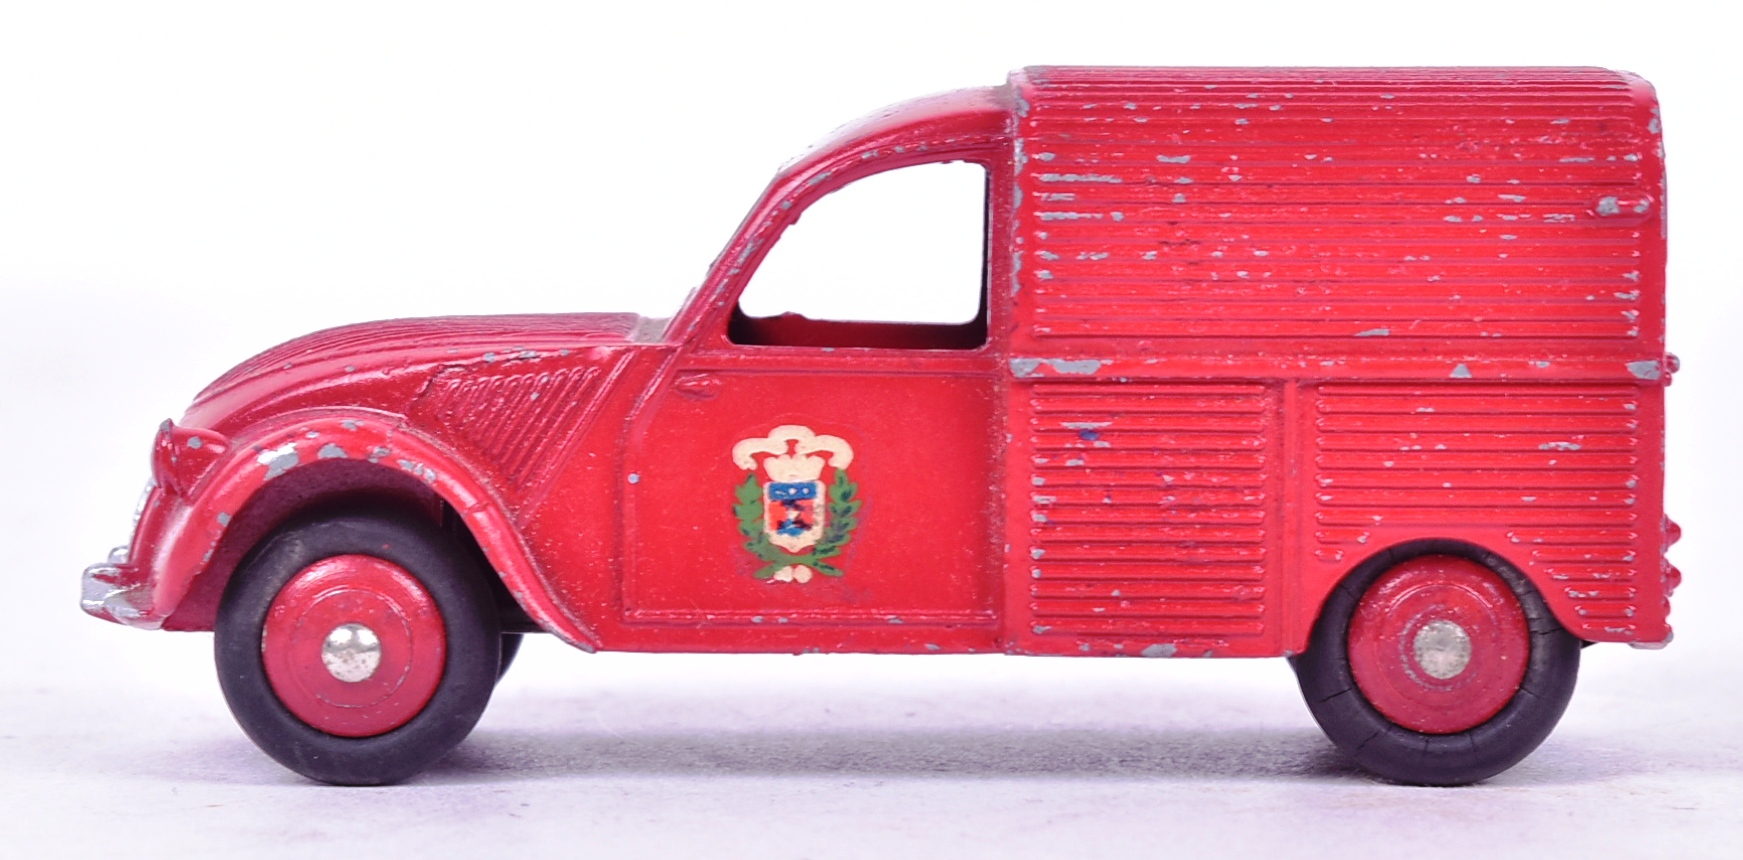 DIECAST - FRENCH DINKY TOYS - CITROEN 2CV FIRE VAN - Image 2 of 6